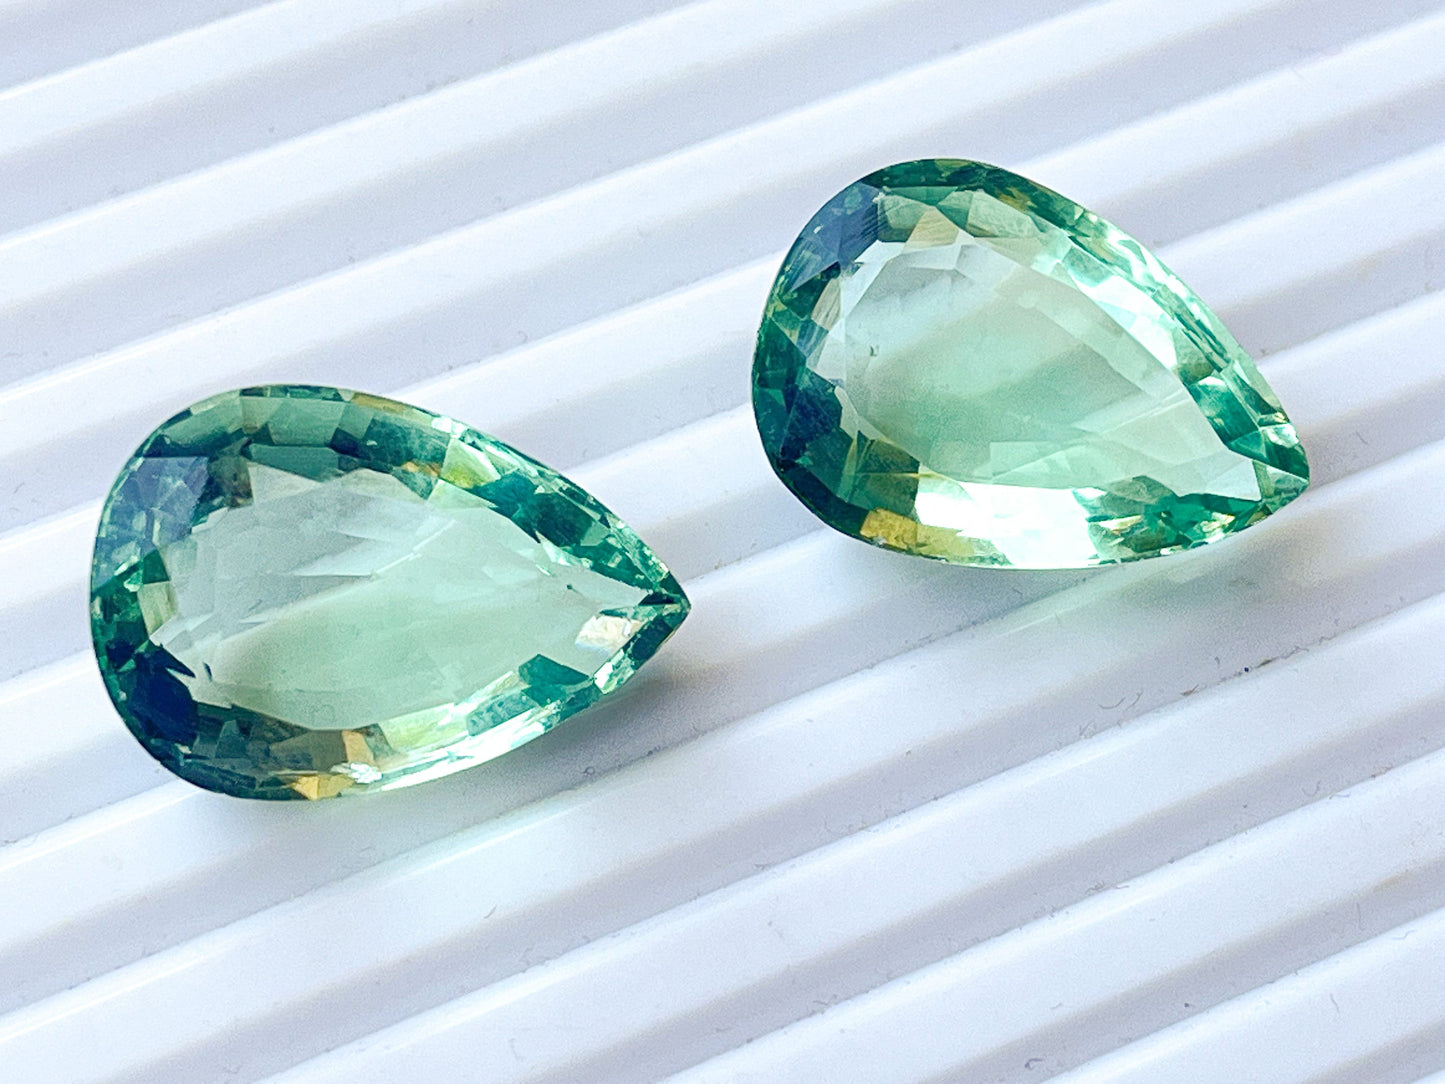 18x30MM Natural Green Fluorite Pear Shape faceted Cut Loose Gemstone Matching Pair